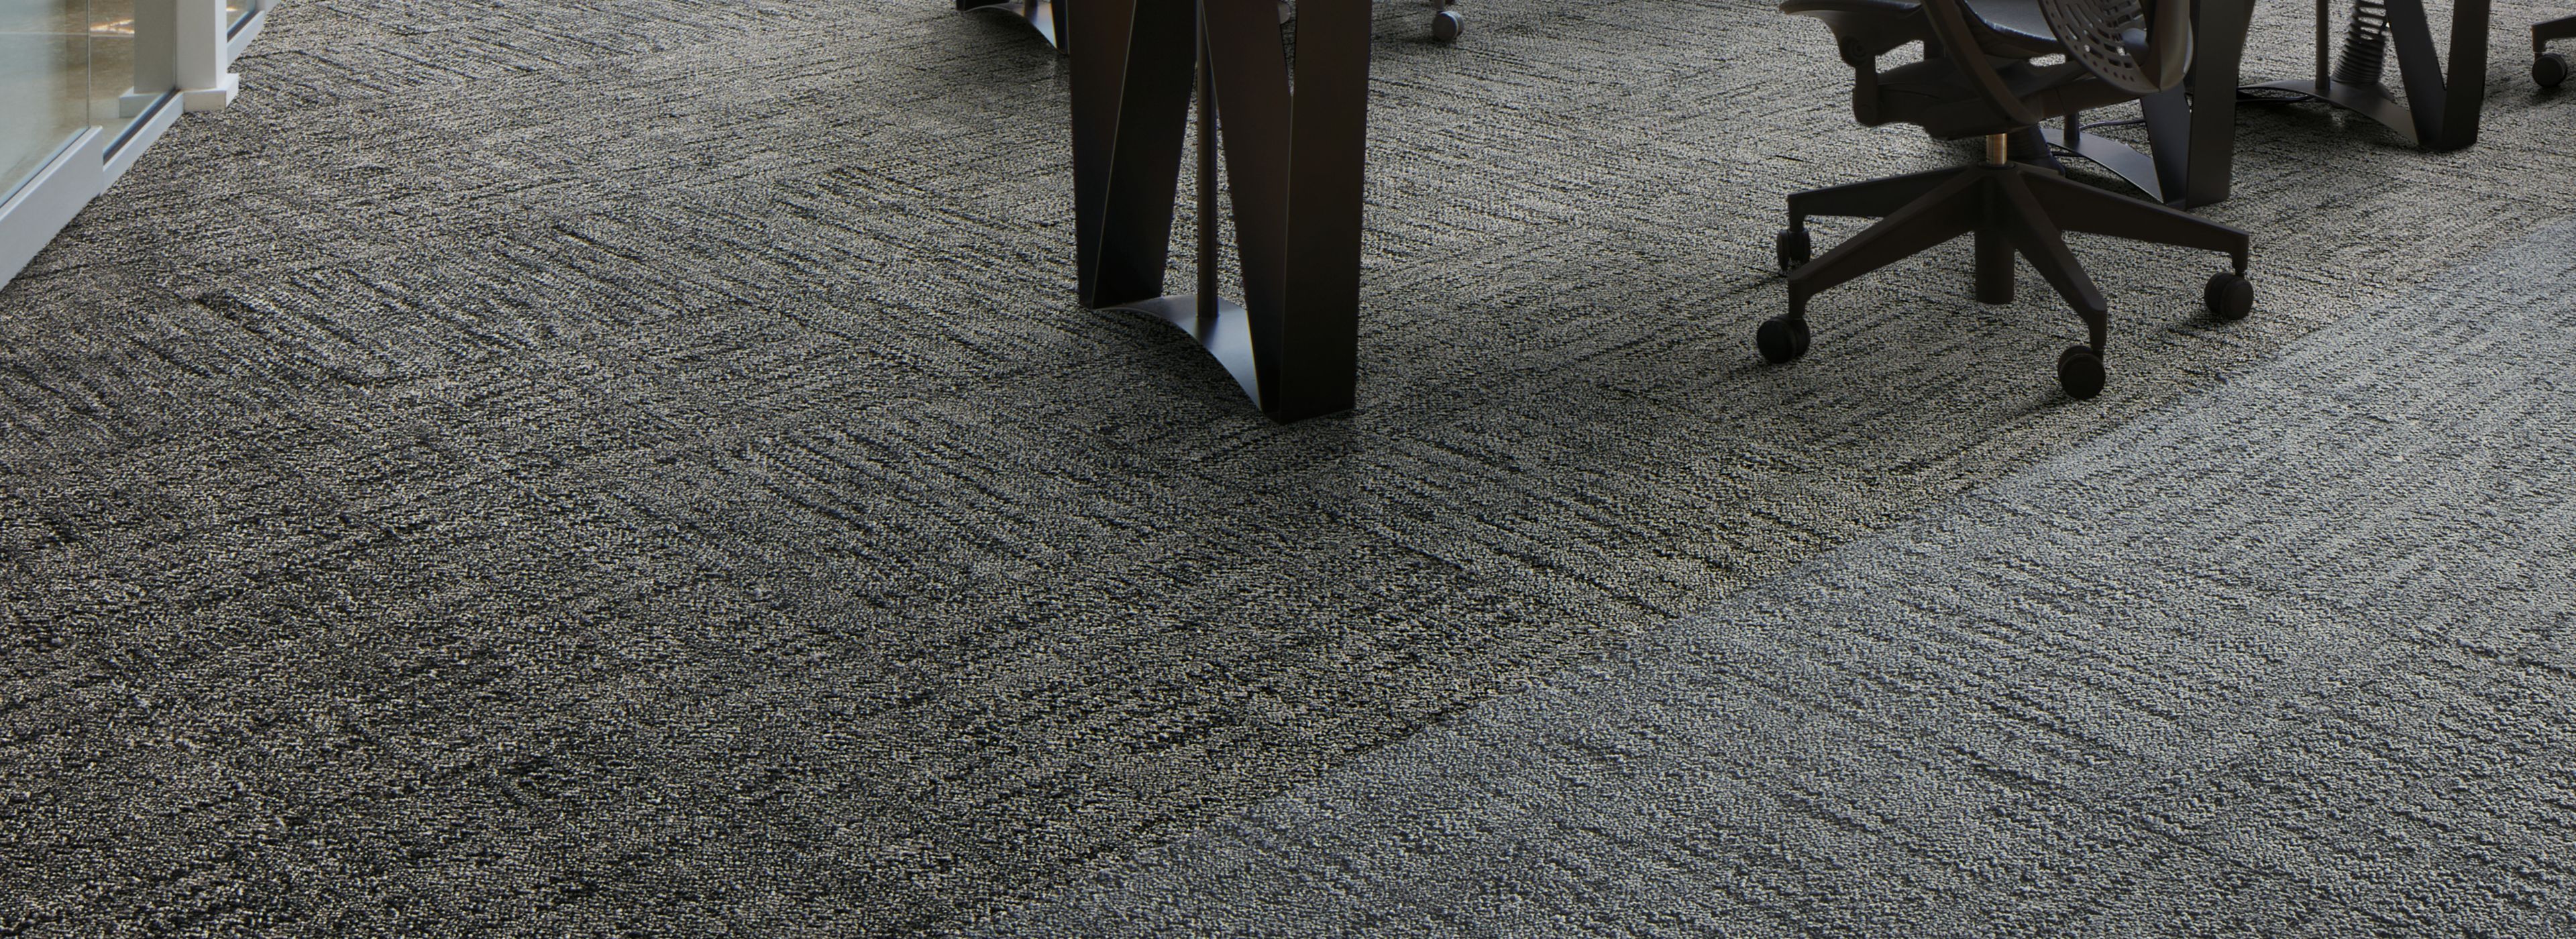 Interface Mirror Mirror carpet tile in open office space with tables and chairs numéro d’image 1